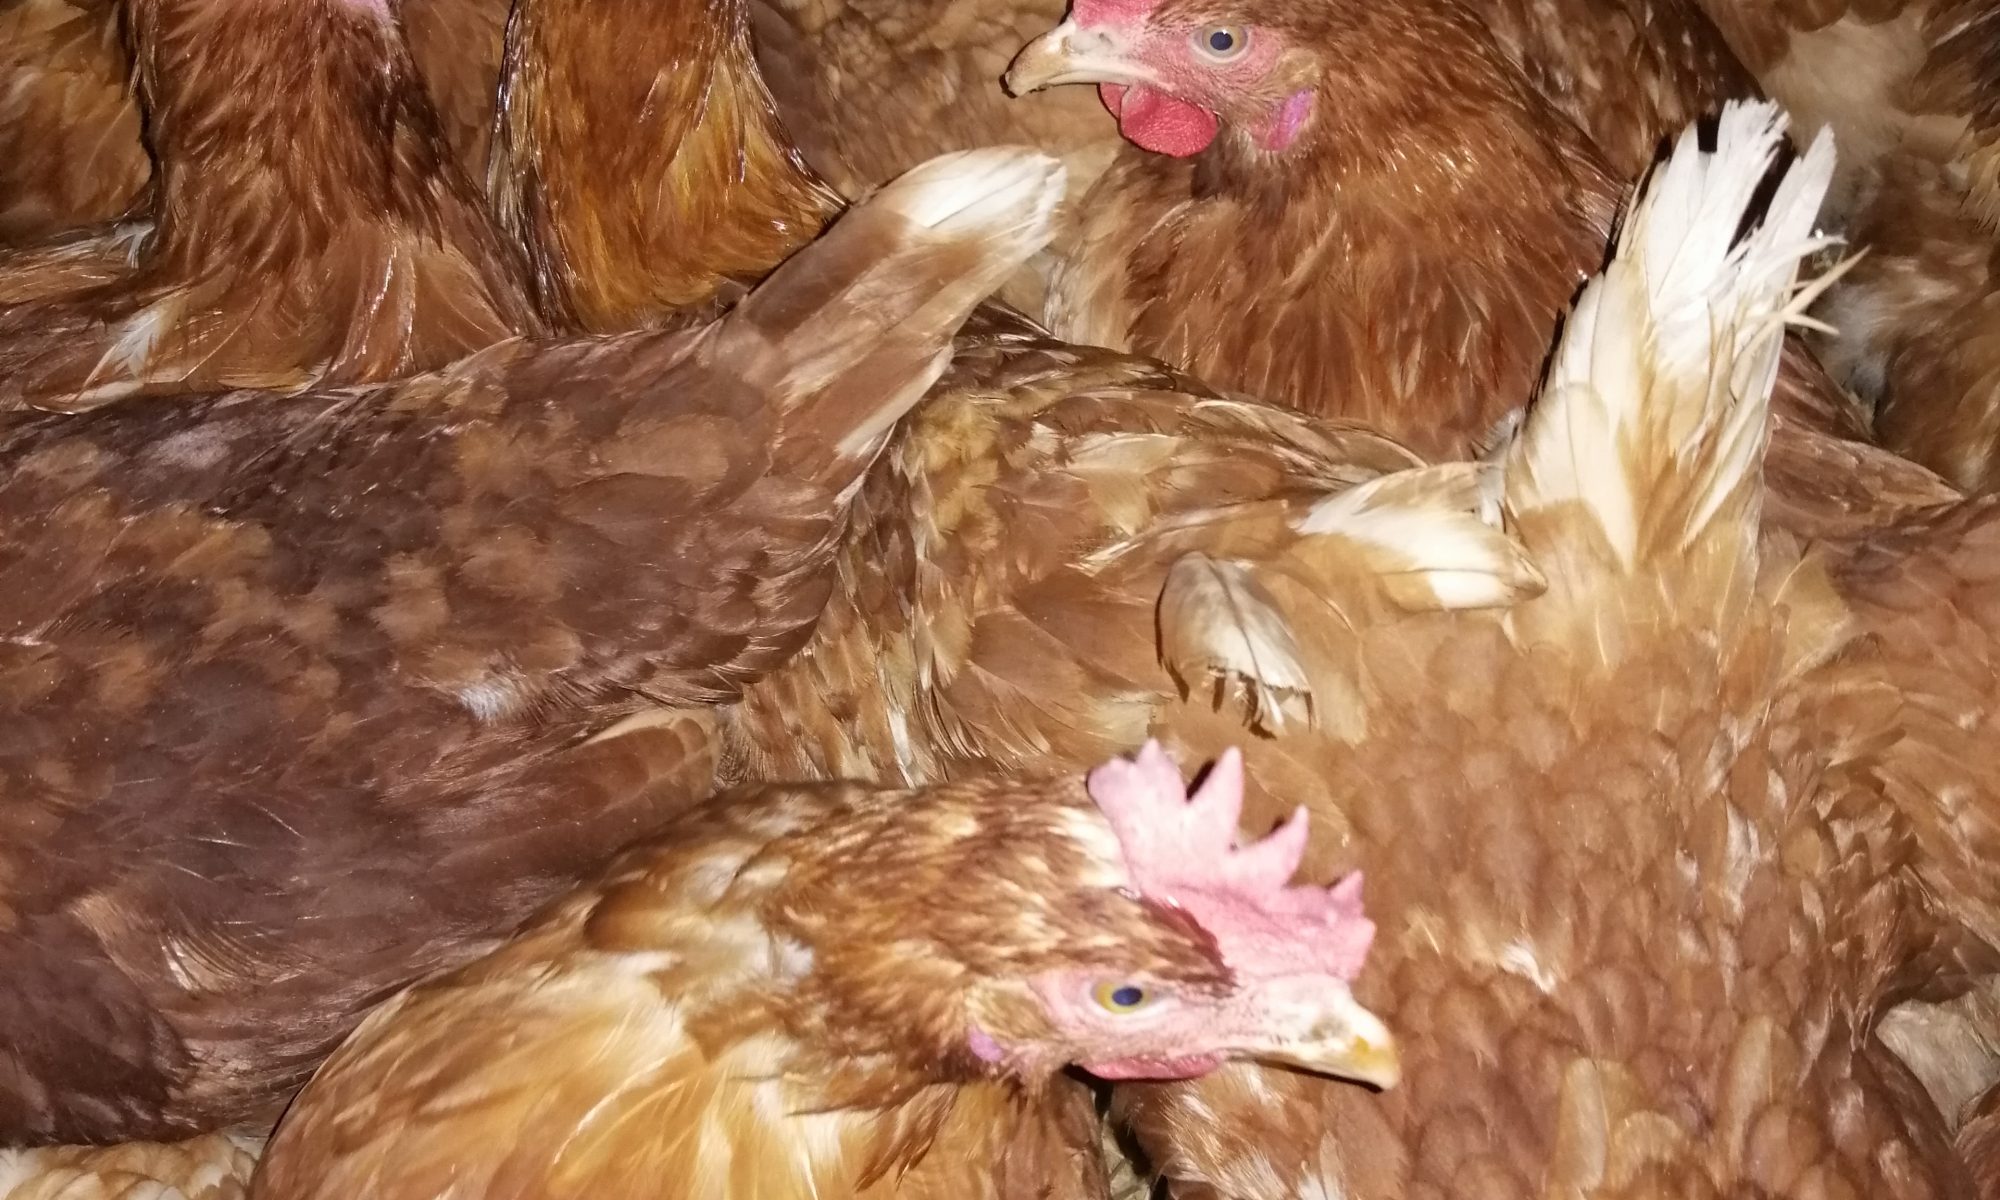 Image shows a group of hens closely together